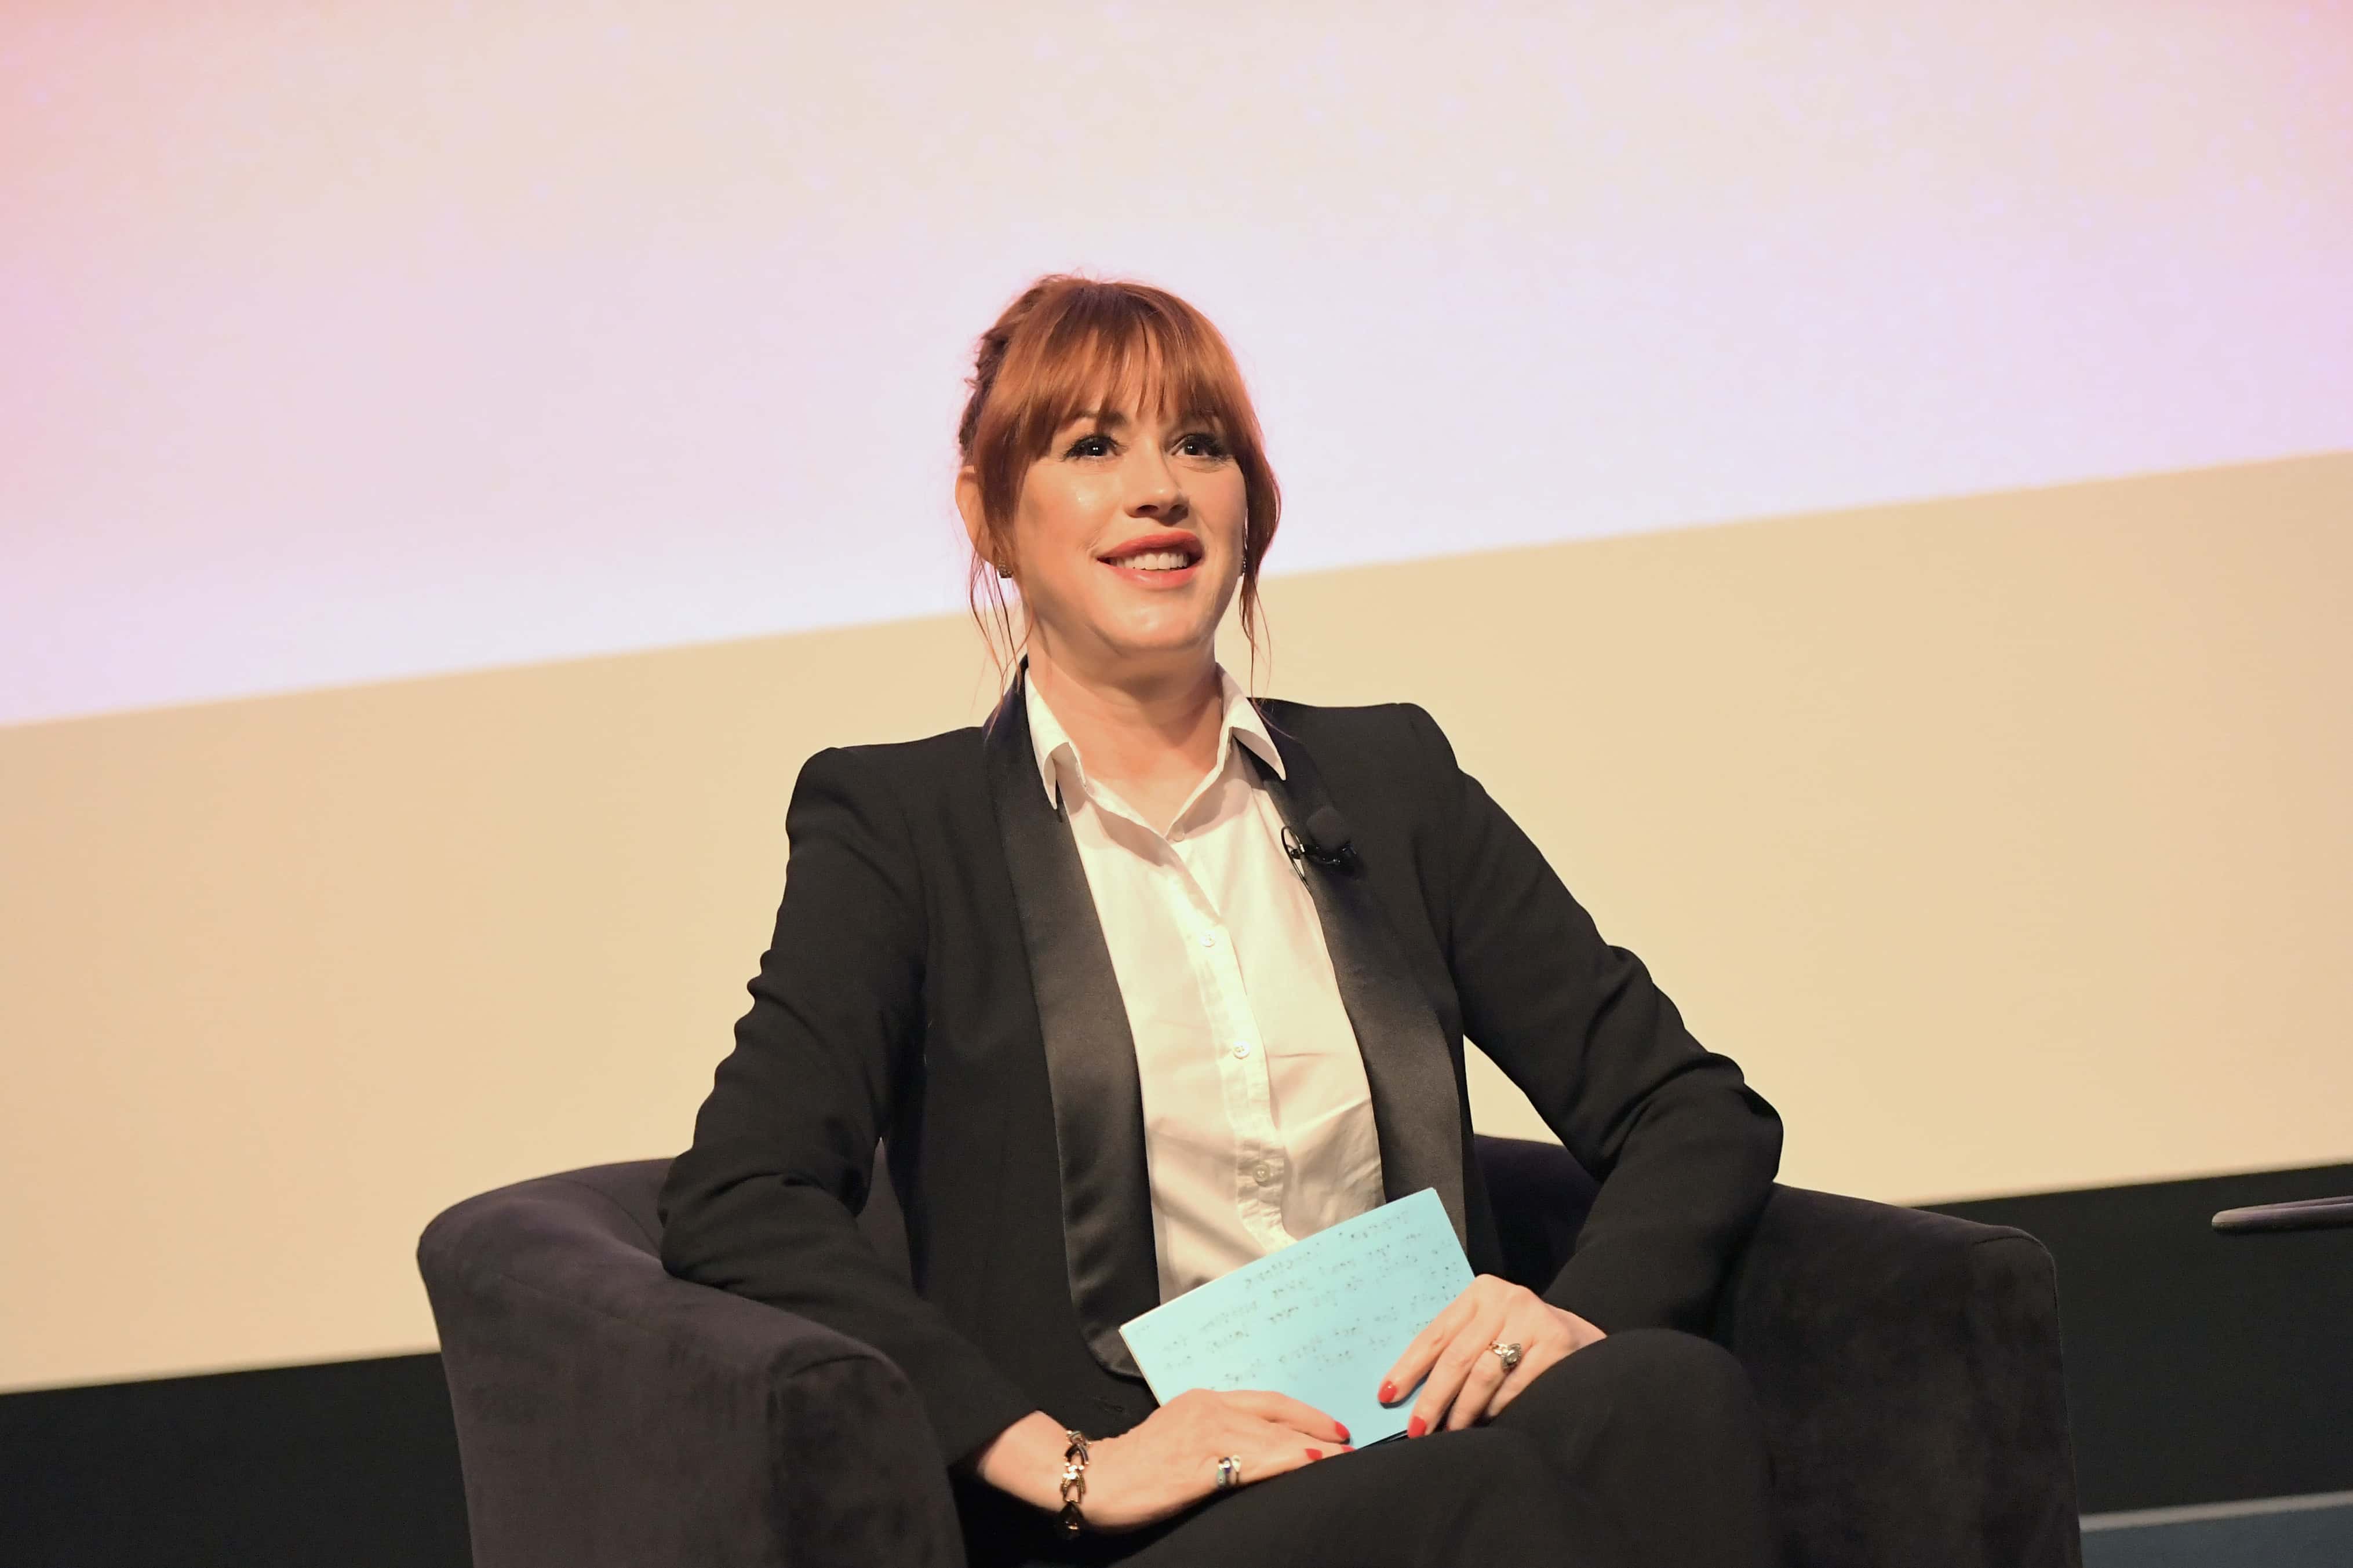 Molly Ringwald Facts